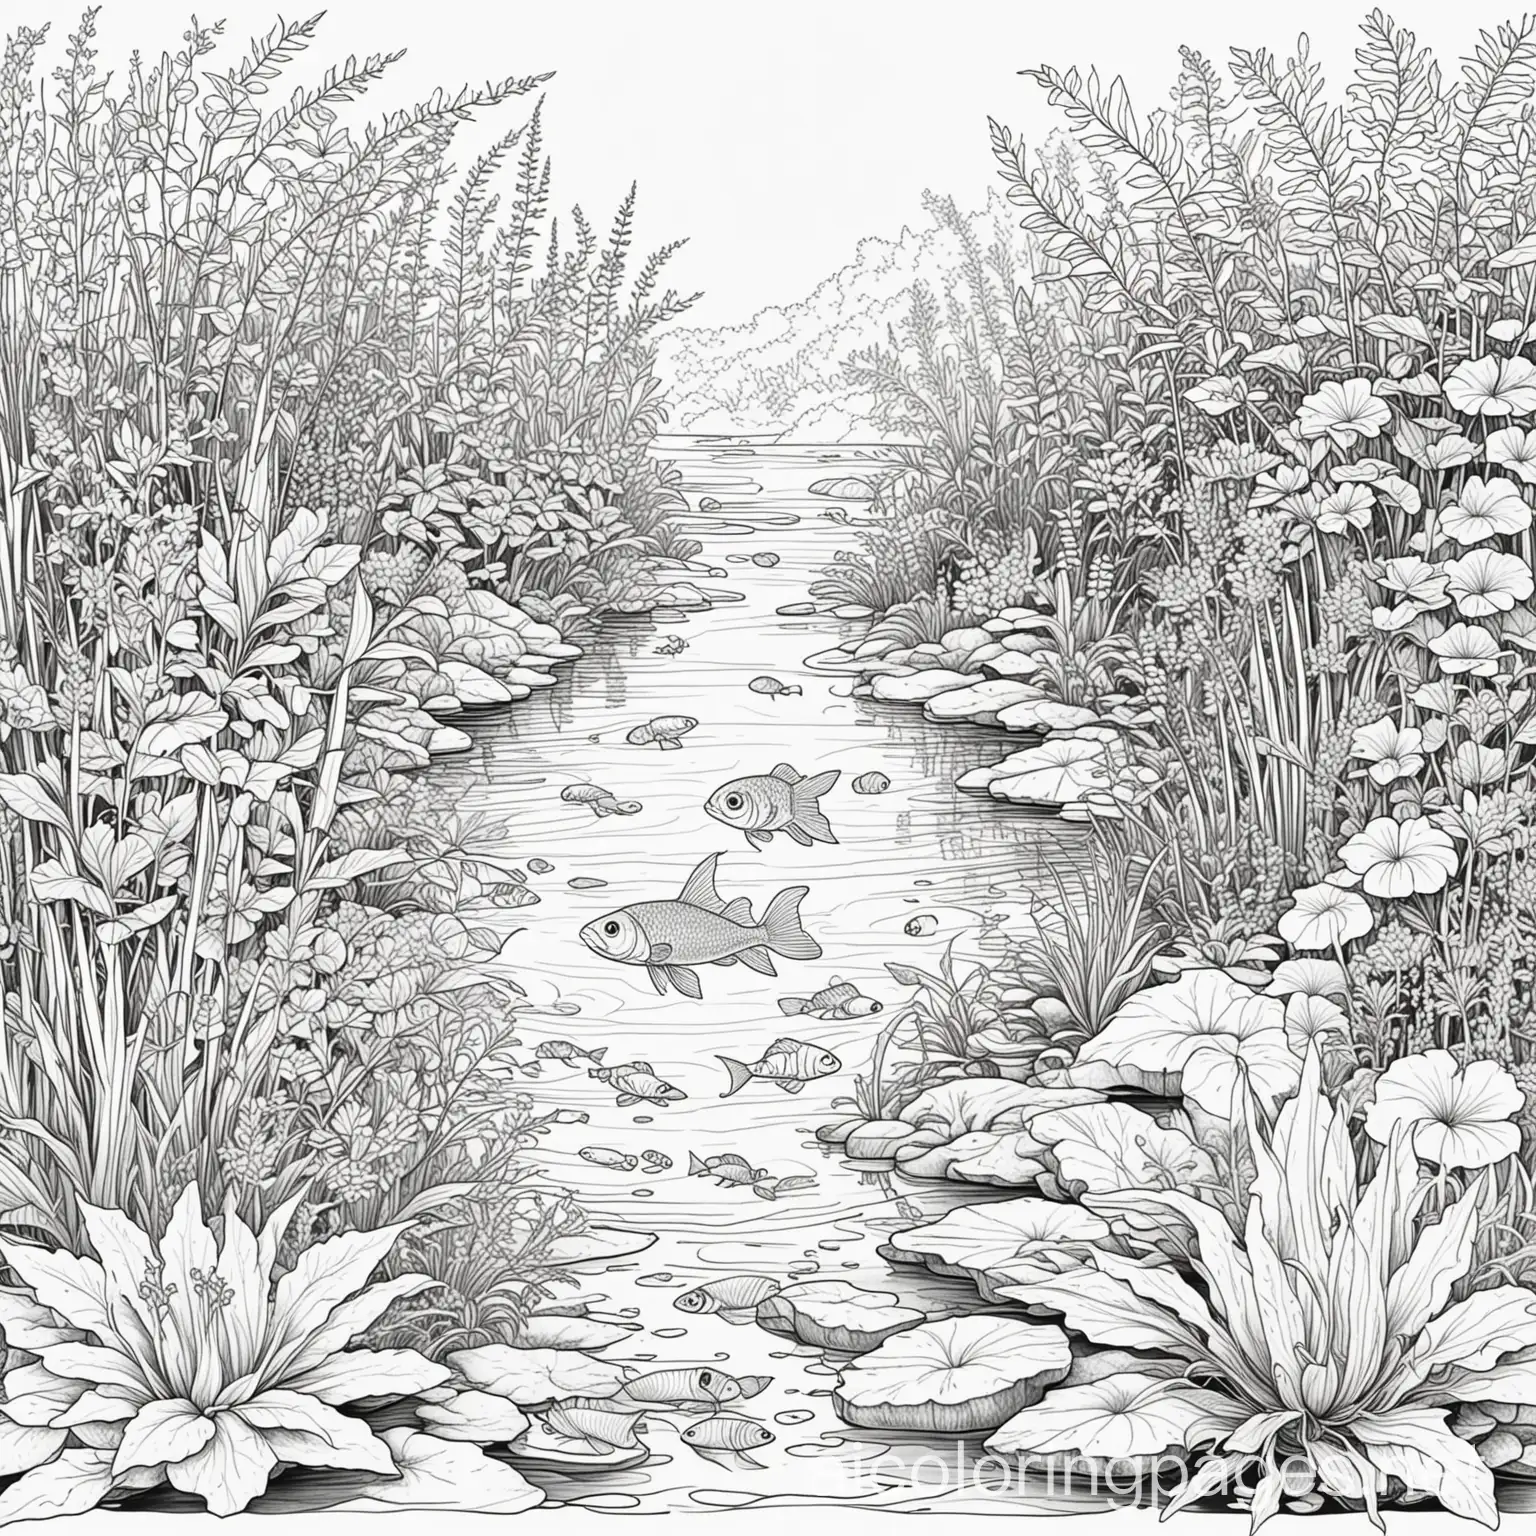 A pond inhabited by luminescent fish and surrounded by colorful, exotic plants., Coloring Page, black and white, line art, white background, Simplicity, Ample White Space. The background of the coloring page is plain white to make it easy for young children to color within the lines. The outlines of all the subjects are easy to distinguish, making it simple for kids to color without too much difficulty